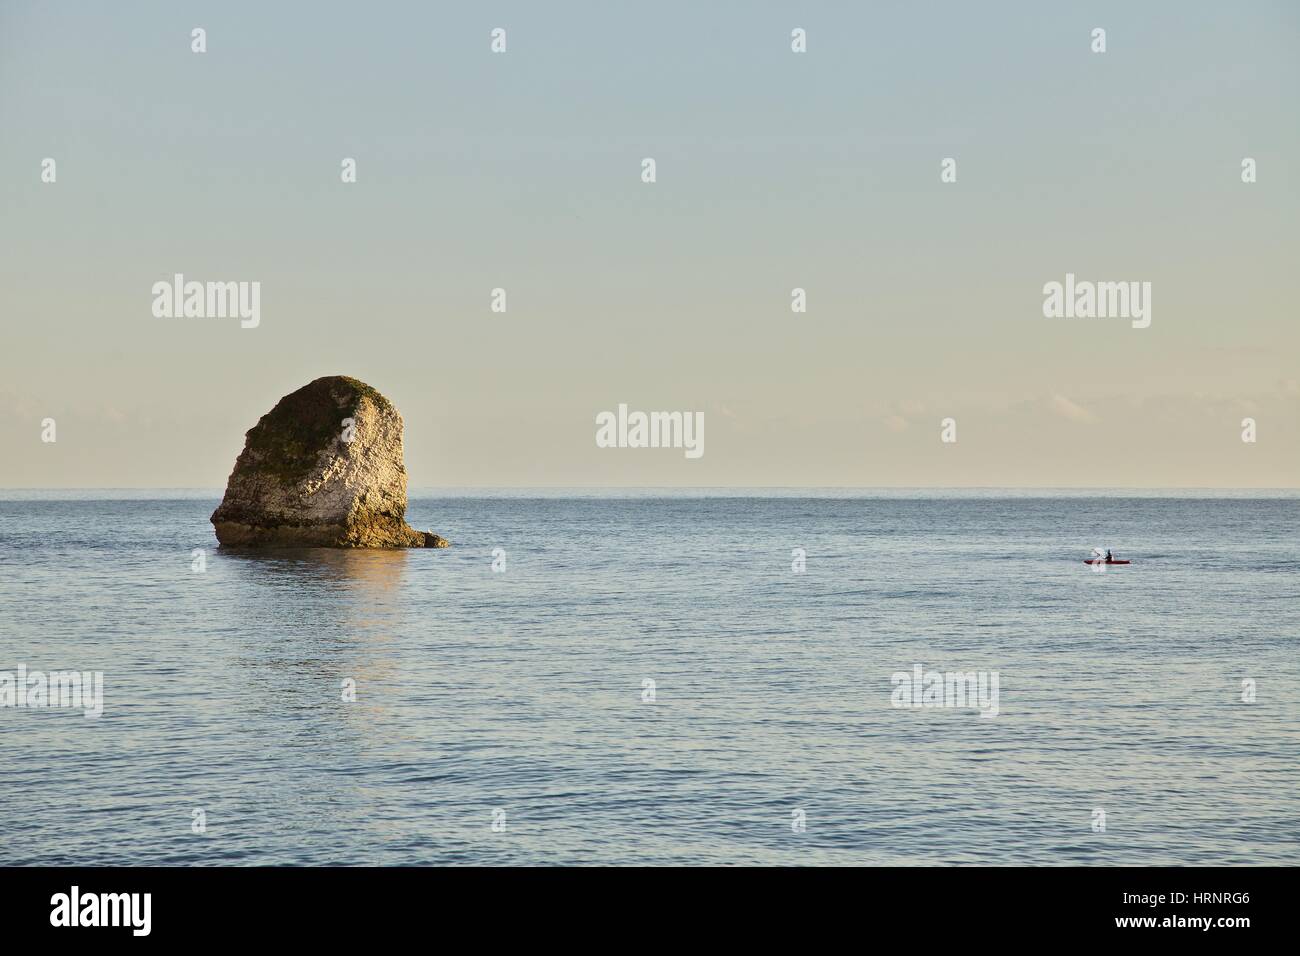 The rock at Freshwater Bay, Isle of Wight with kayak approaching Stock Photo